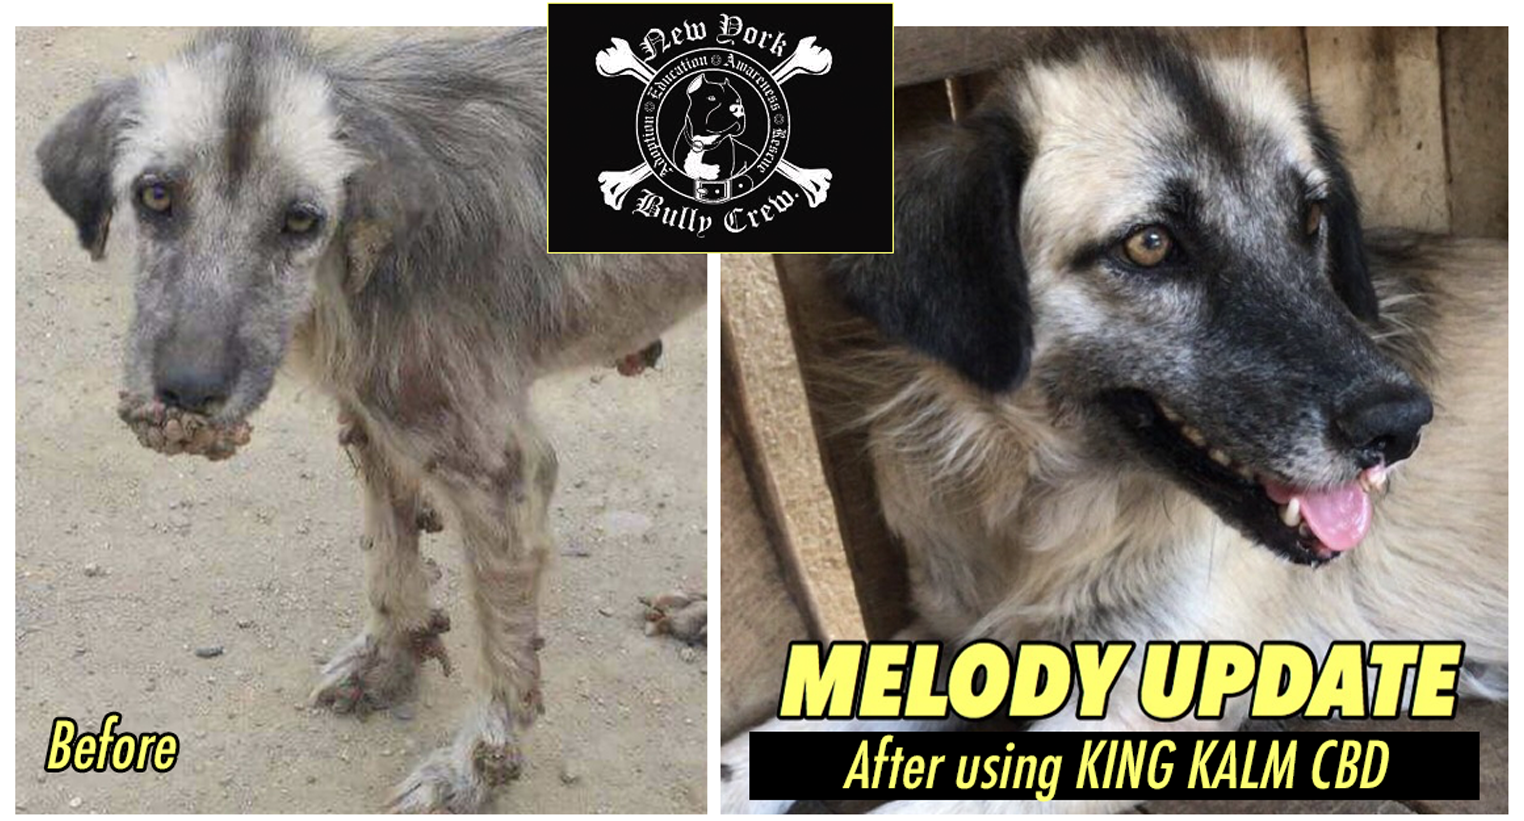 KING KALM CBD Working So Great on Rescue Dogs in Need